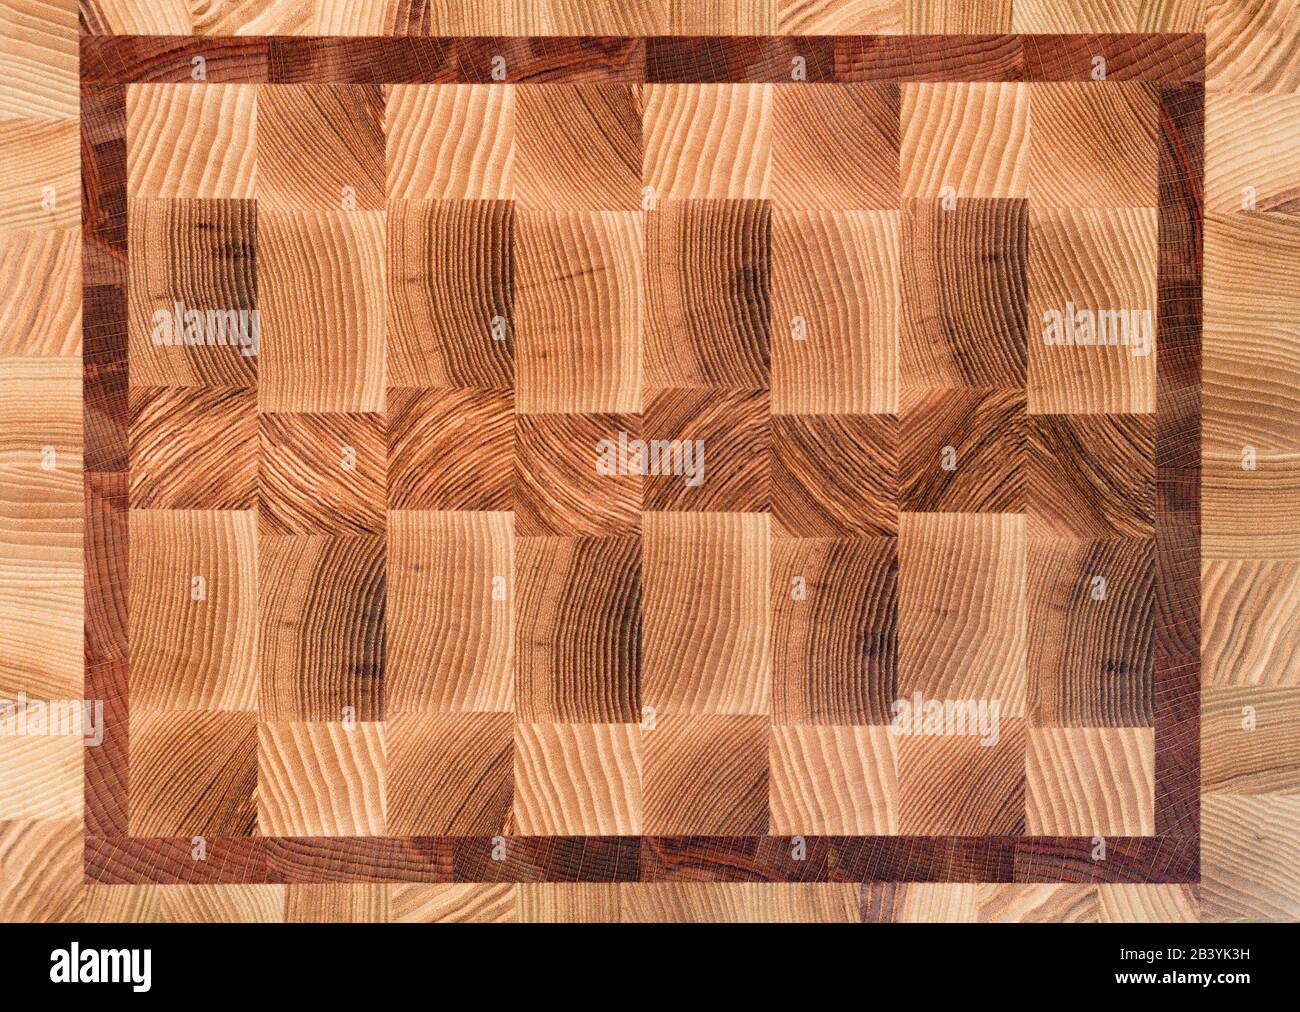 Wooden butcher chopping block, natural end wood board texture background pattern close up. Stock Photo